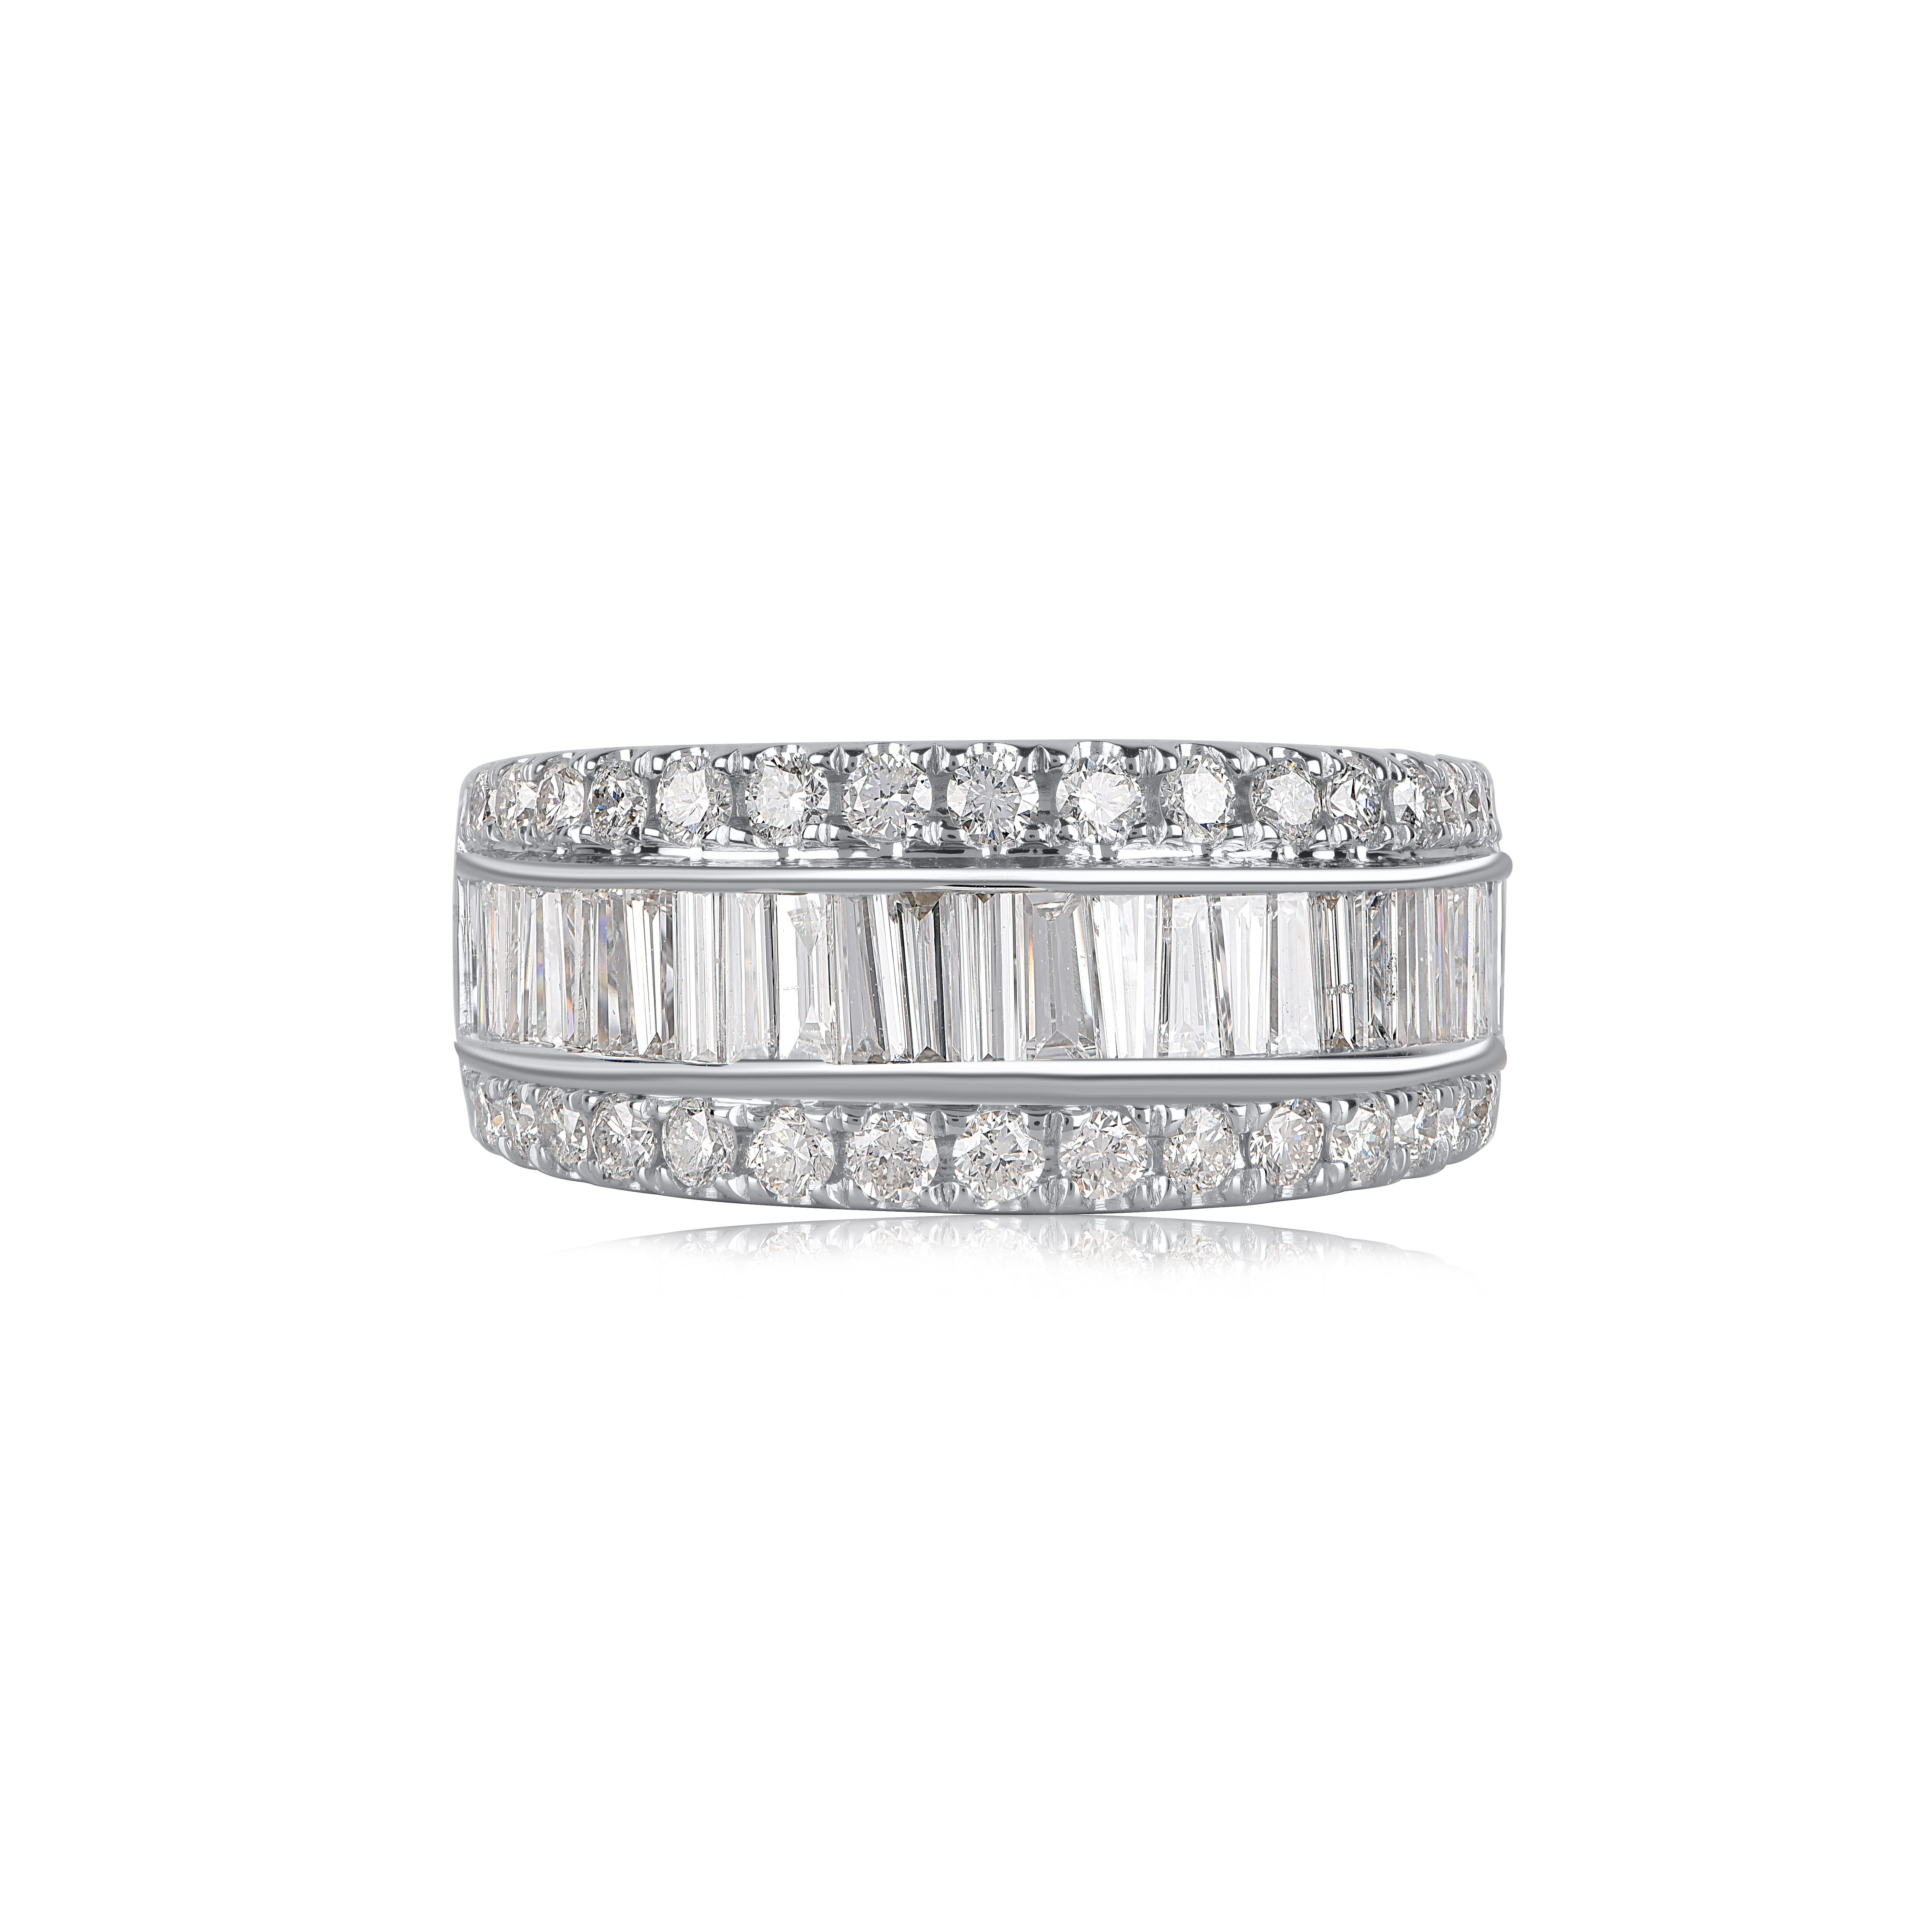 Express your love for her in the most classic way with this band ring. This beautiful ring features shimmering brilliant cut and baguette cut diamonds in prong and channel setting. Crafted in 14 karat white gold. The ring is studded with a total of